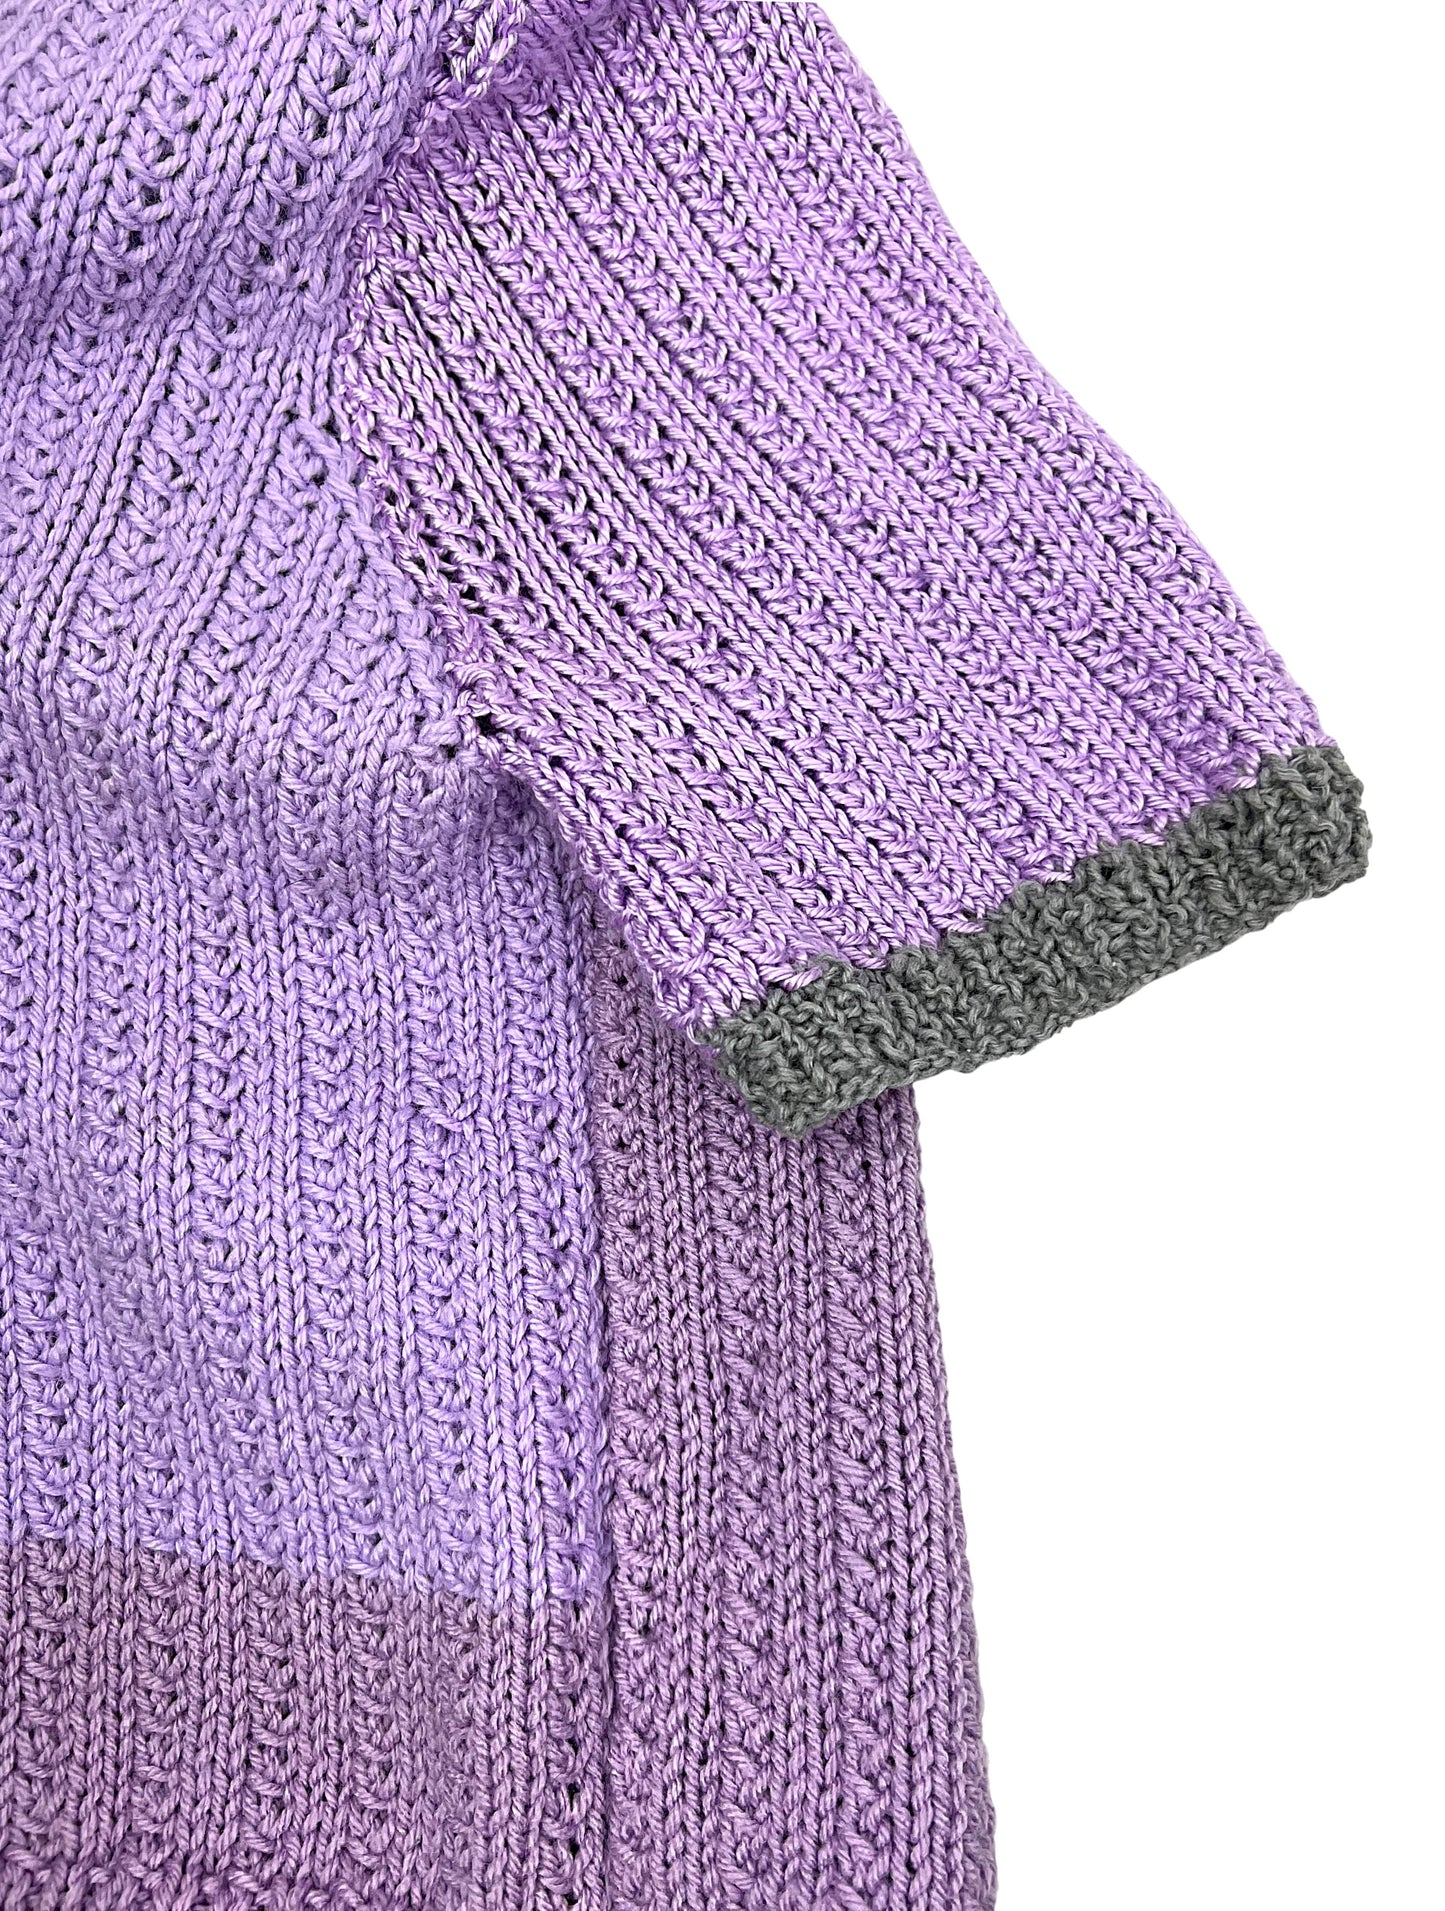 70’s 80’s Lilac & Lavender Crocheted Chunky Mockneck Crop Sweater